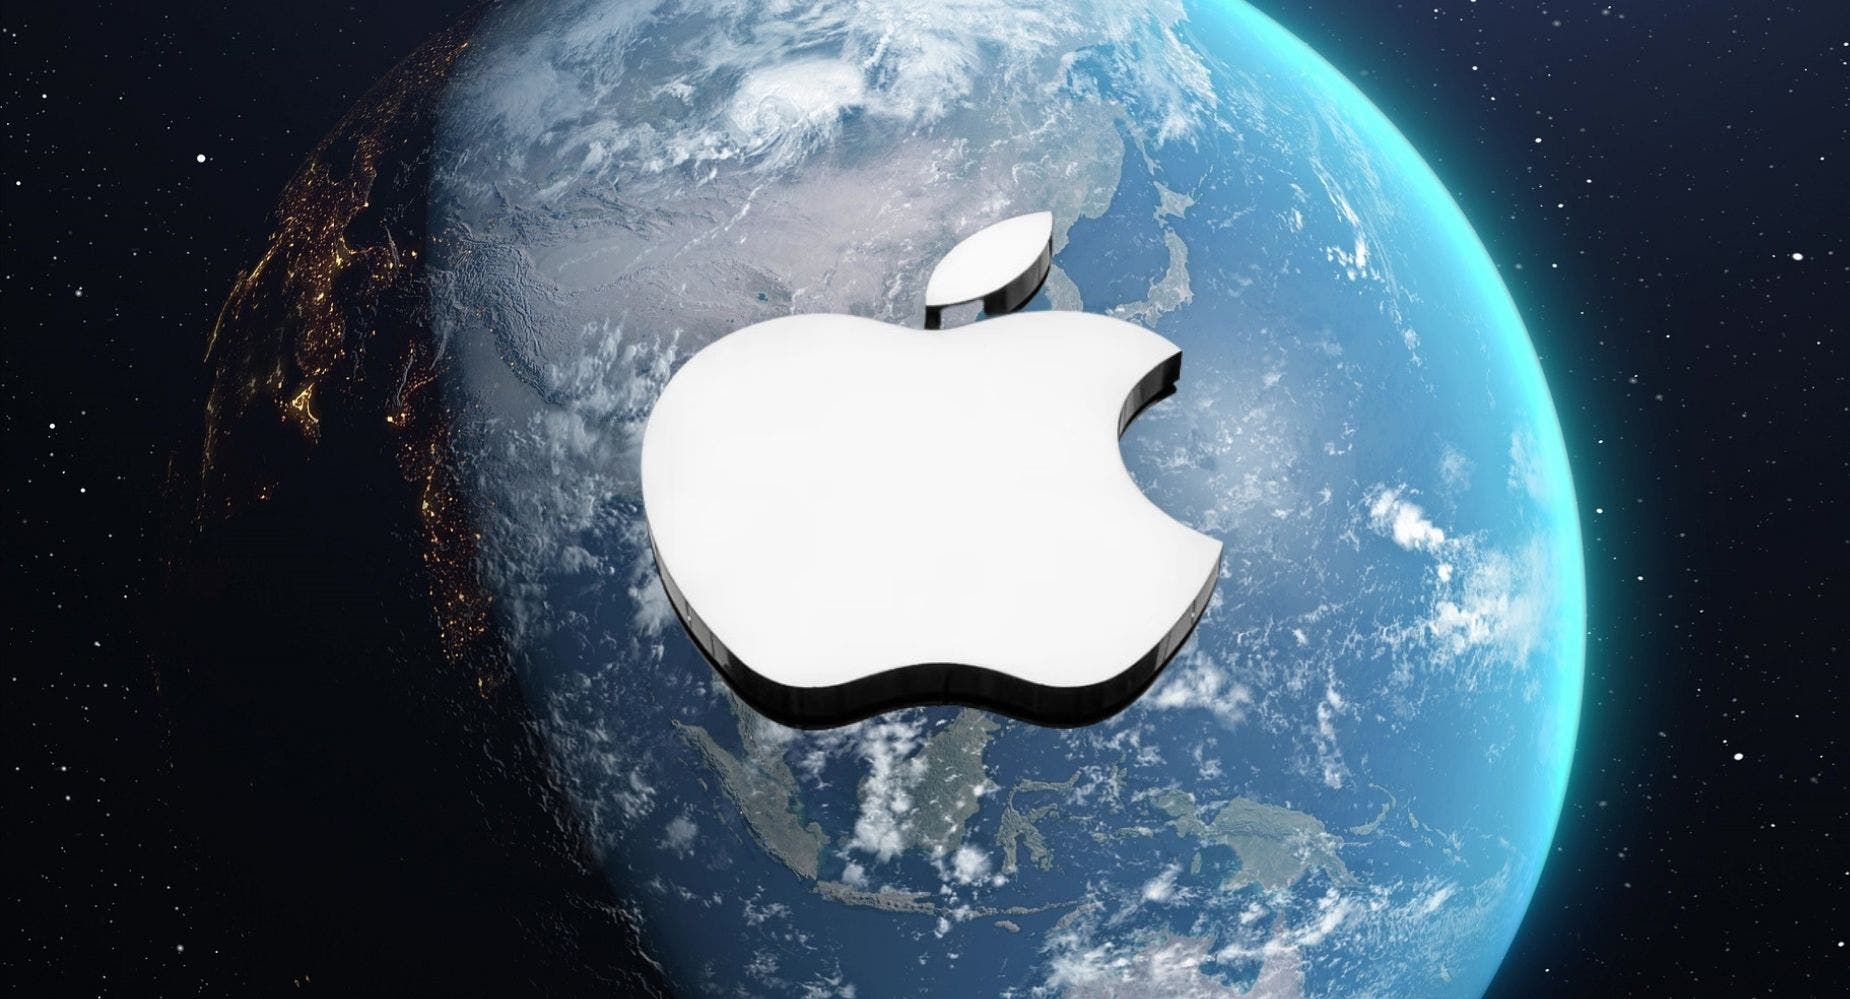 Why Is Apple's Biggest Day Of Year Happening Earlier Than Usual In 2022? Gurman Weighs In